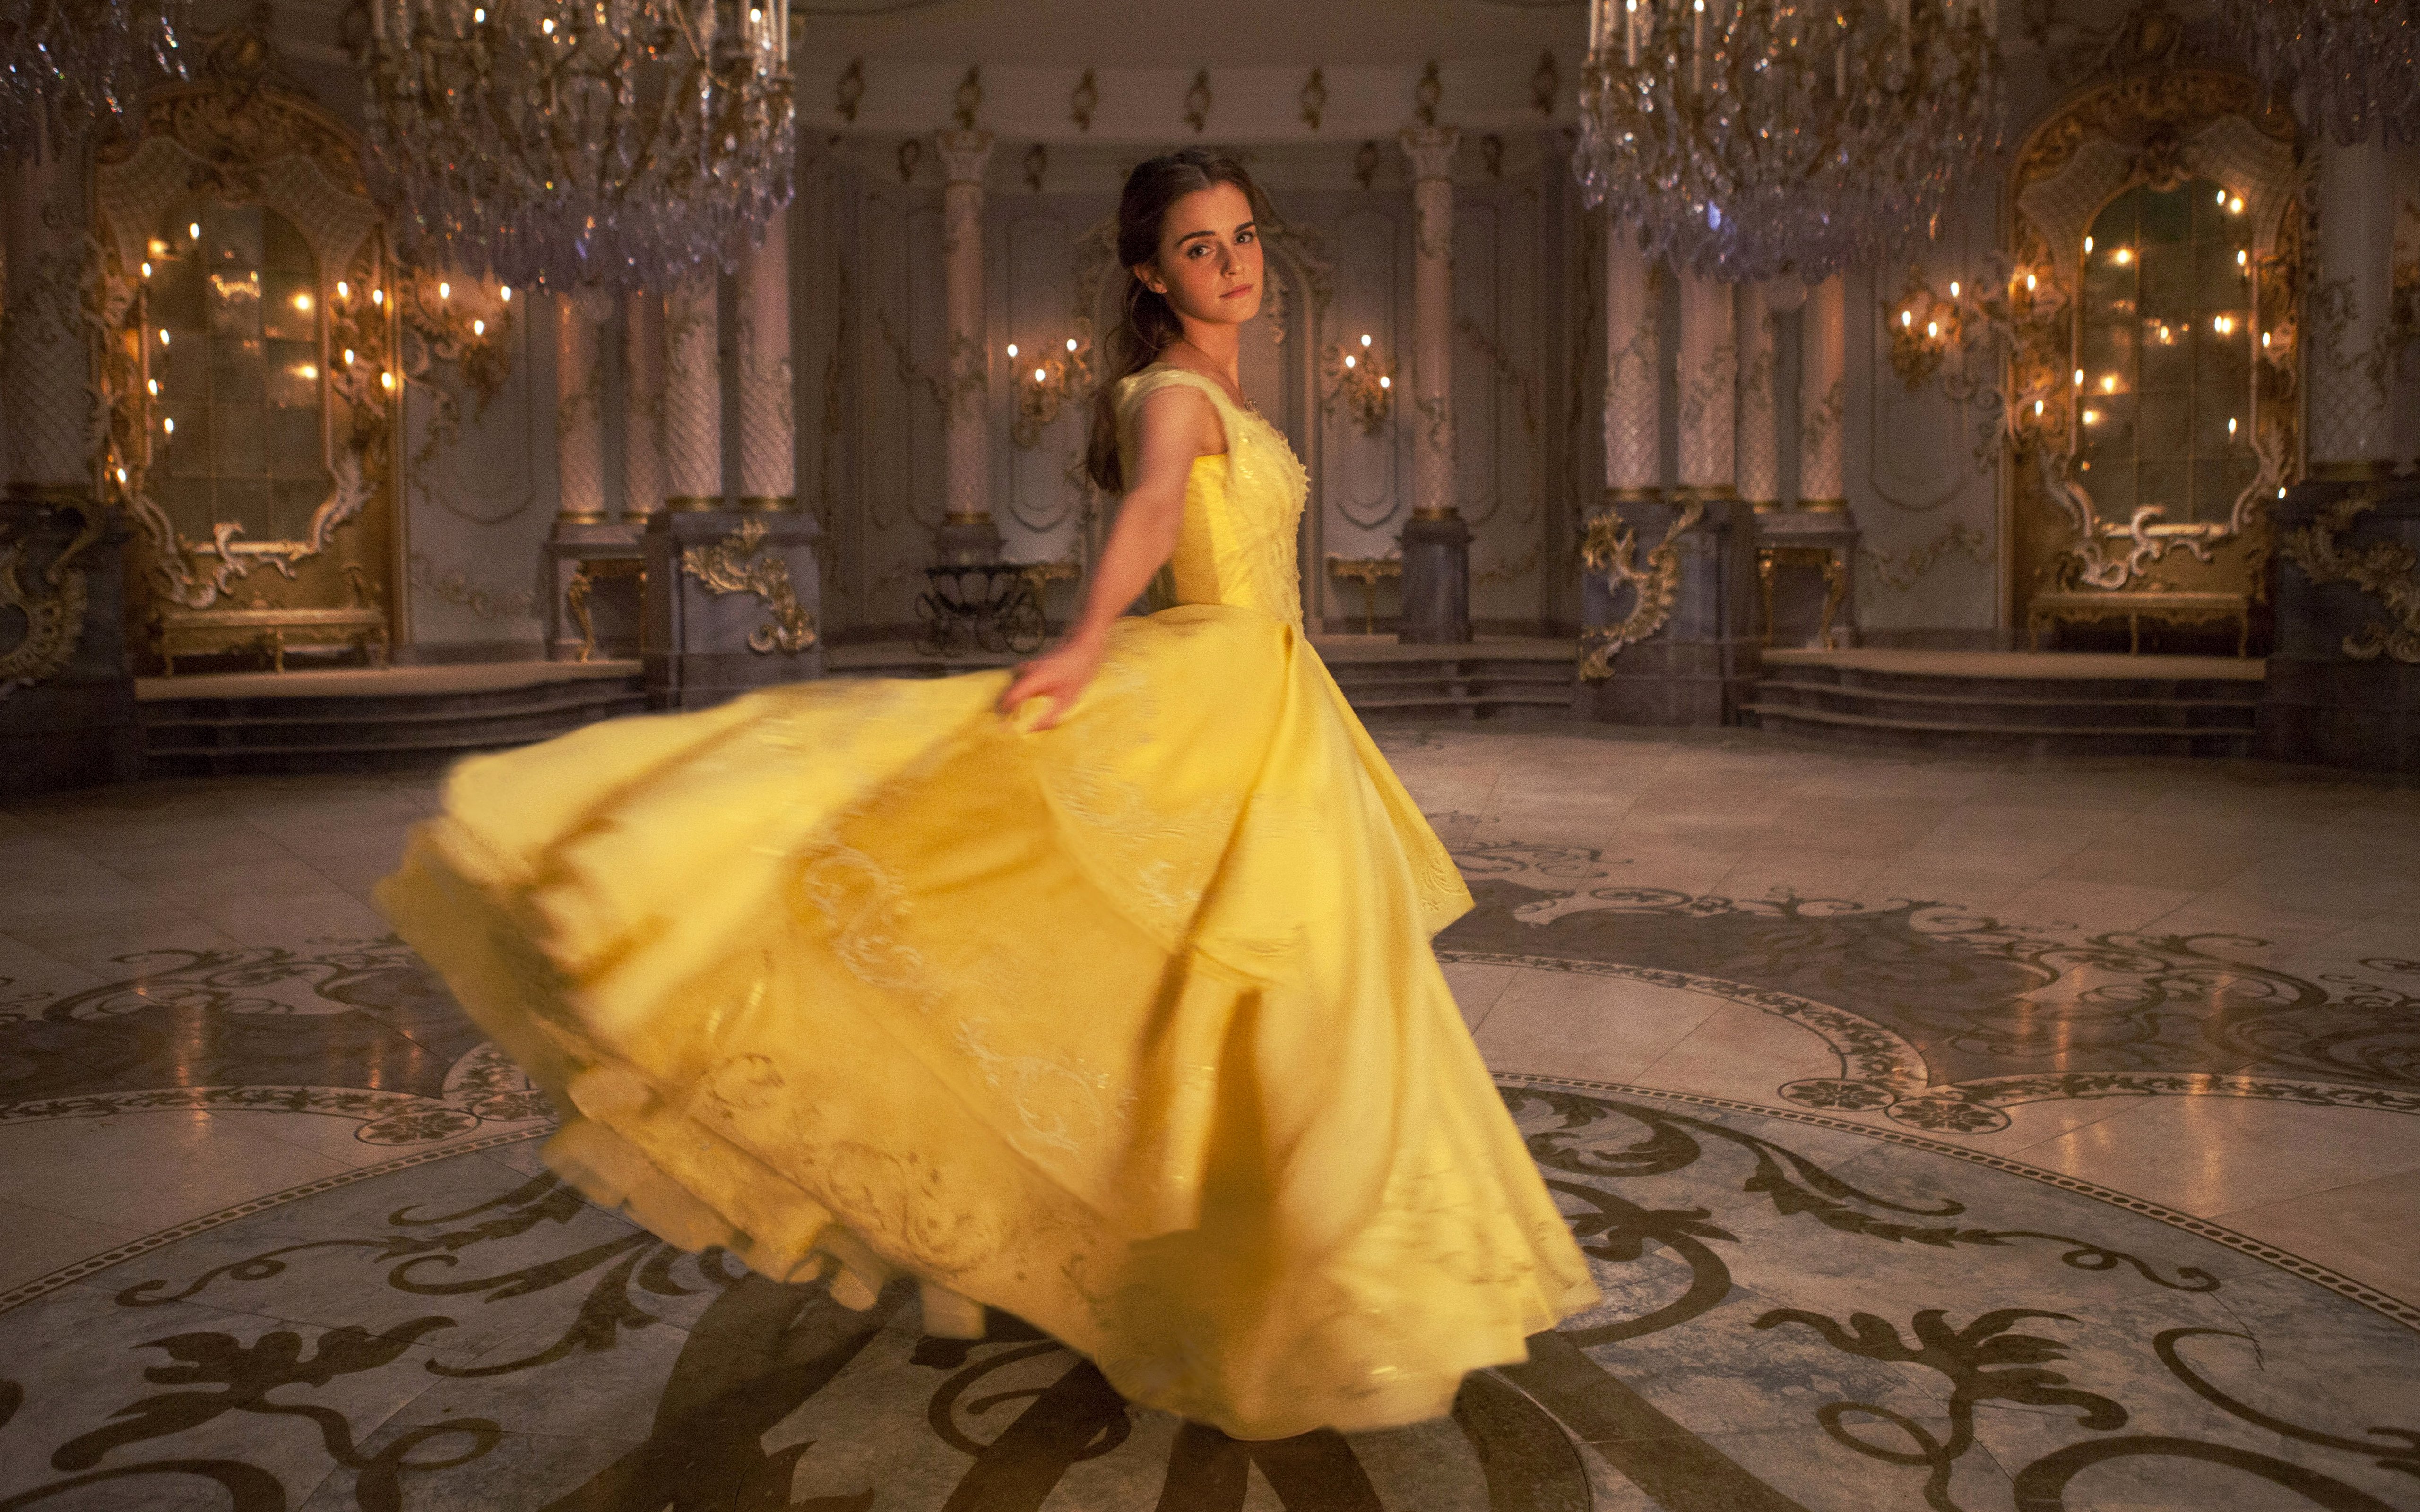 Emma Watson as "Belle" from "Beauty and The Beast (2017)"